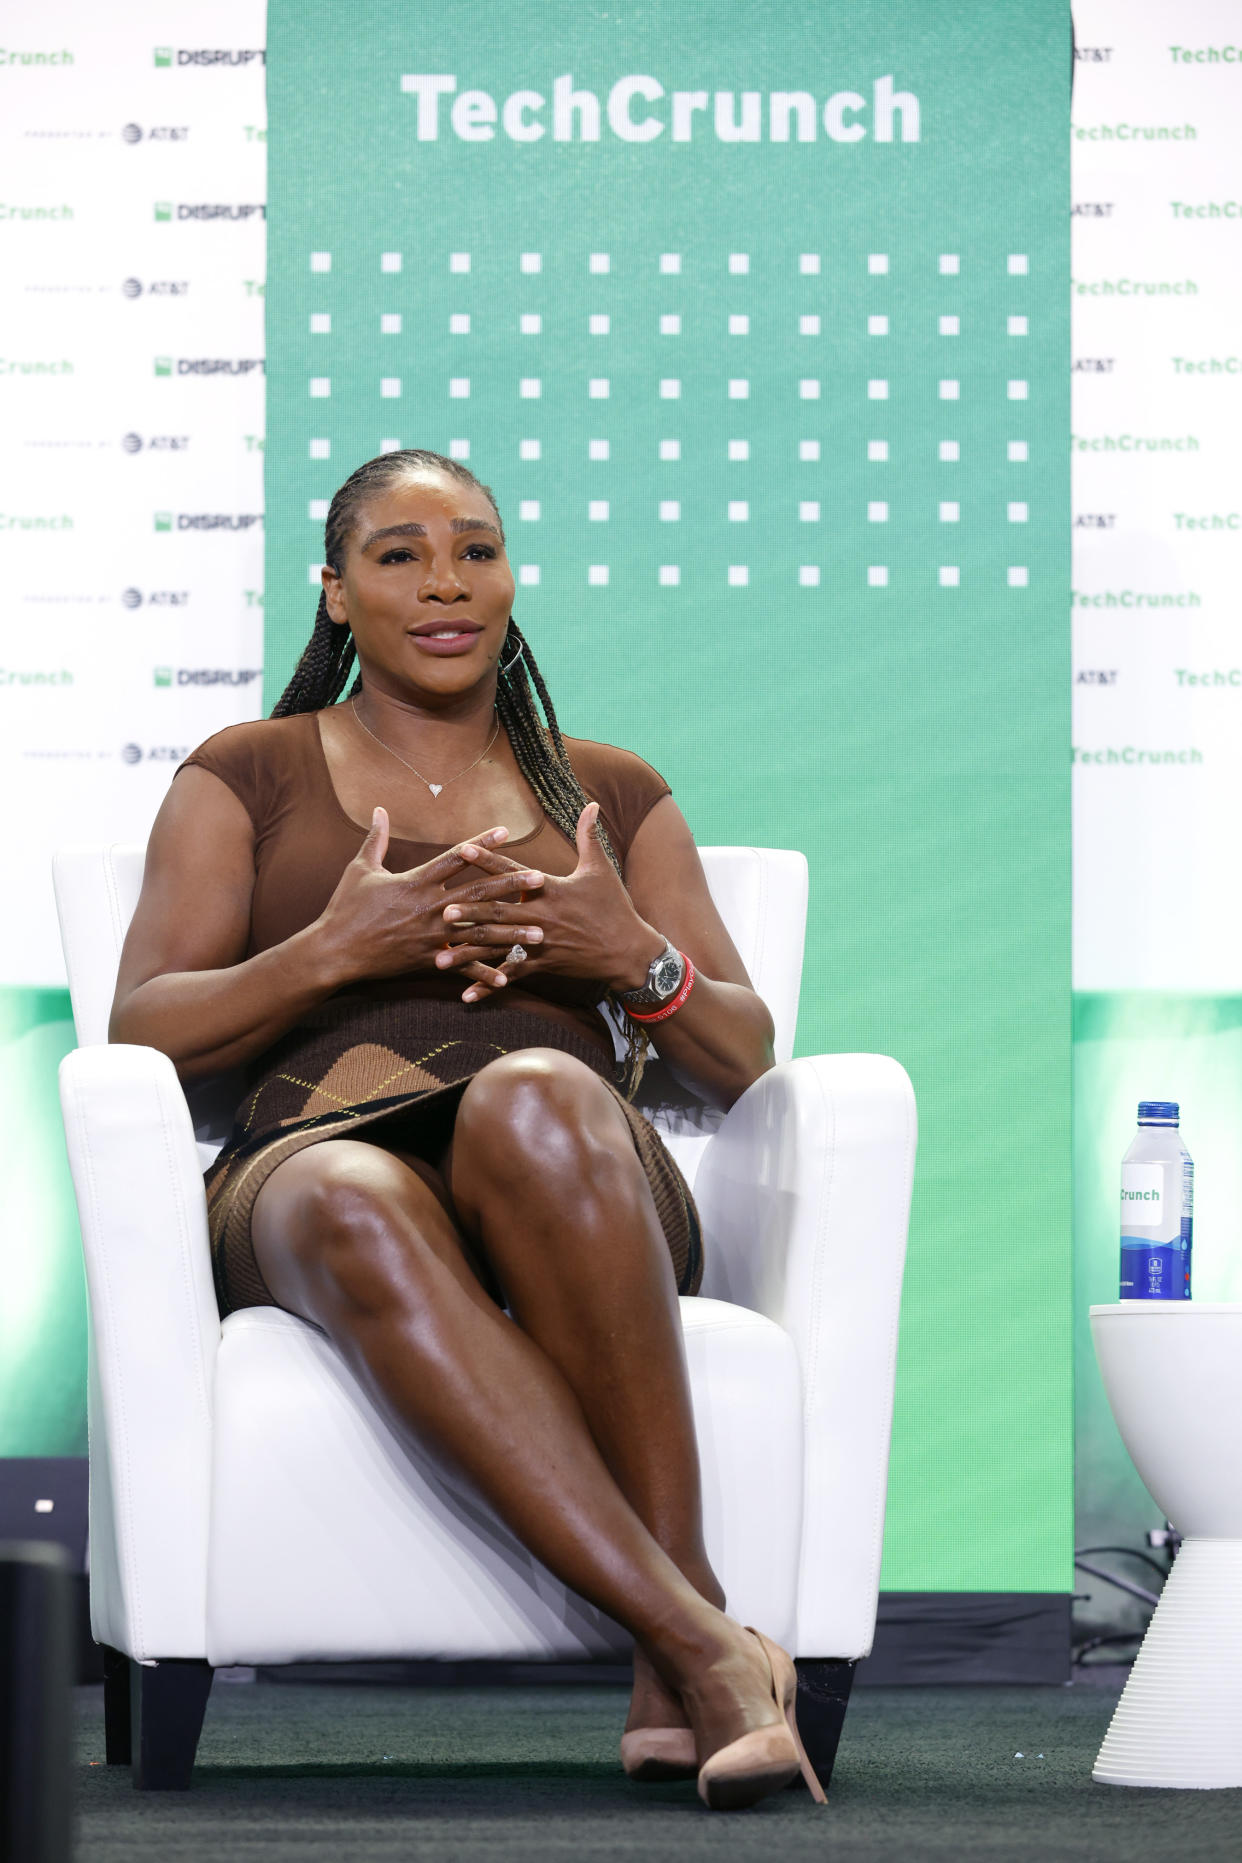 Serena Williams speaks onstage during TechCrunch Disrupt 2022 on October 19, 2022. (Photo by Kimberly White/Getty Images for TechCrunch)